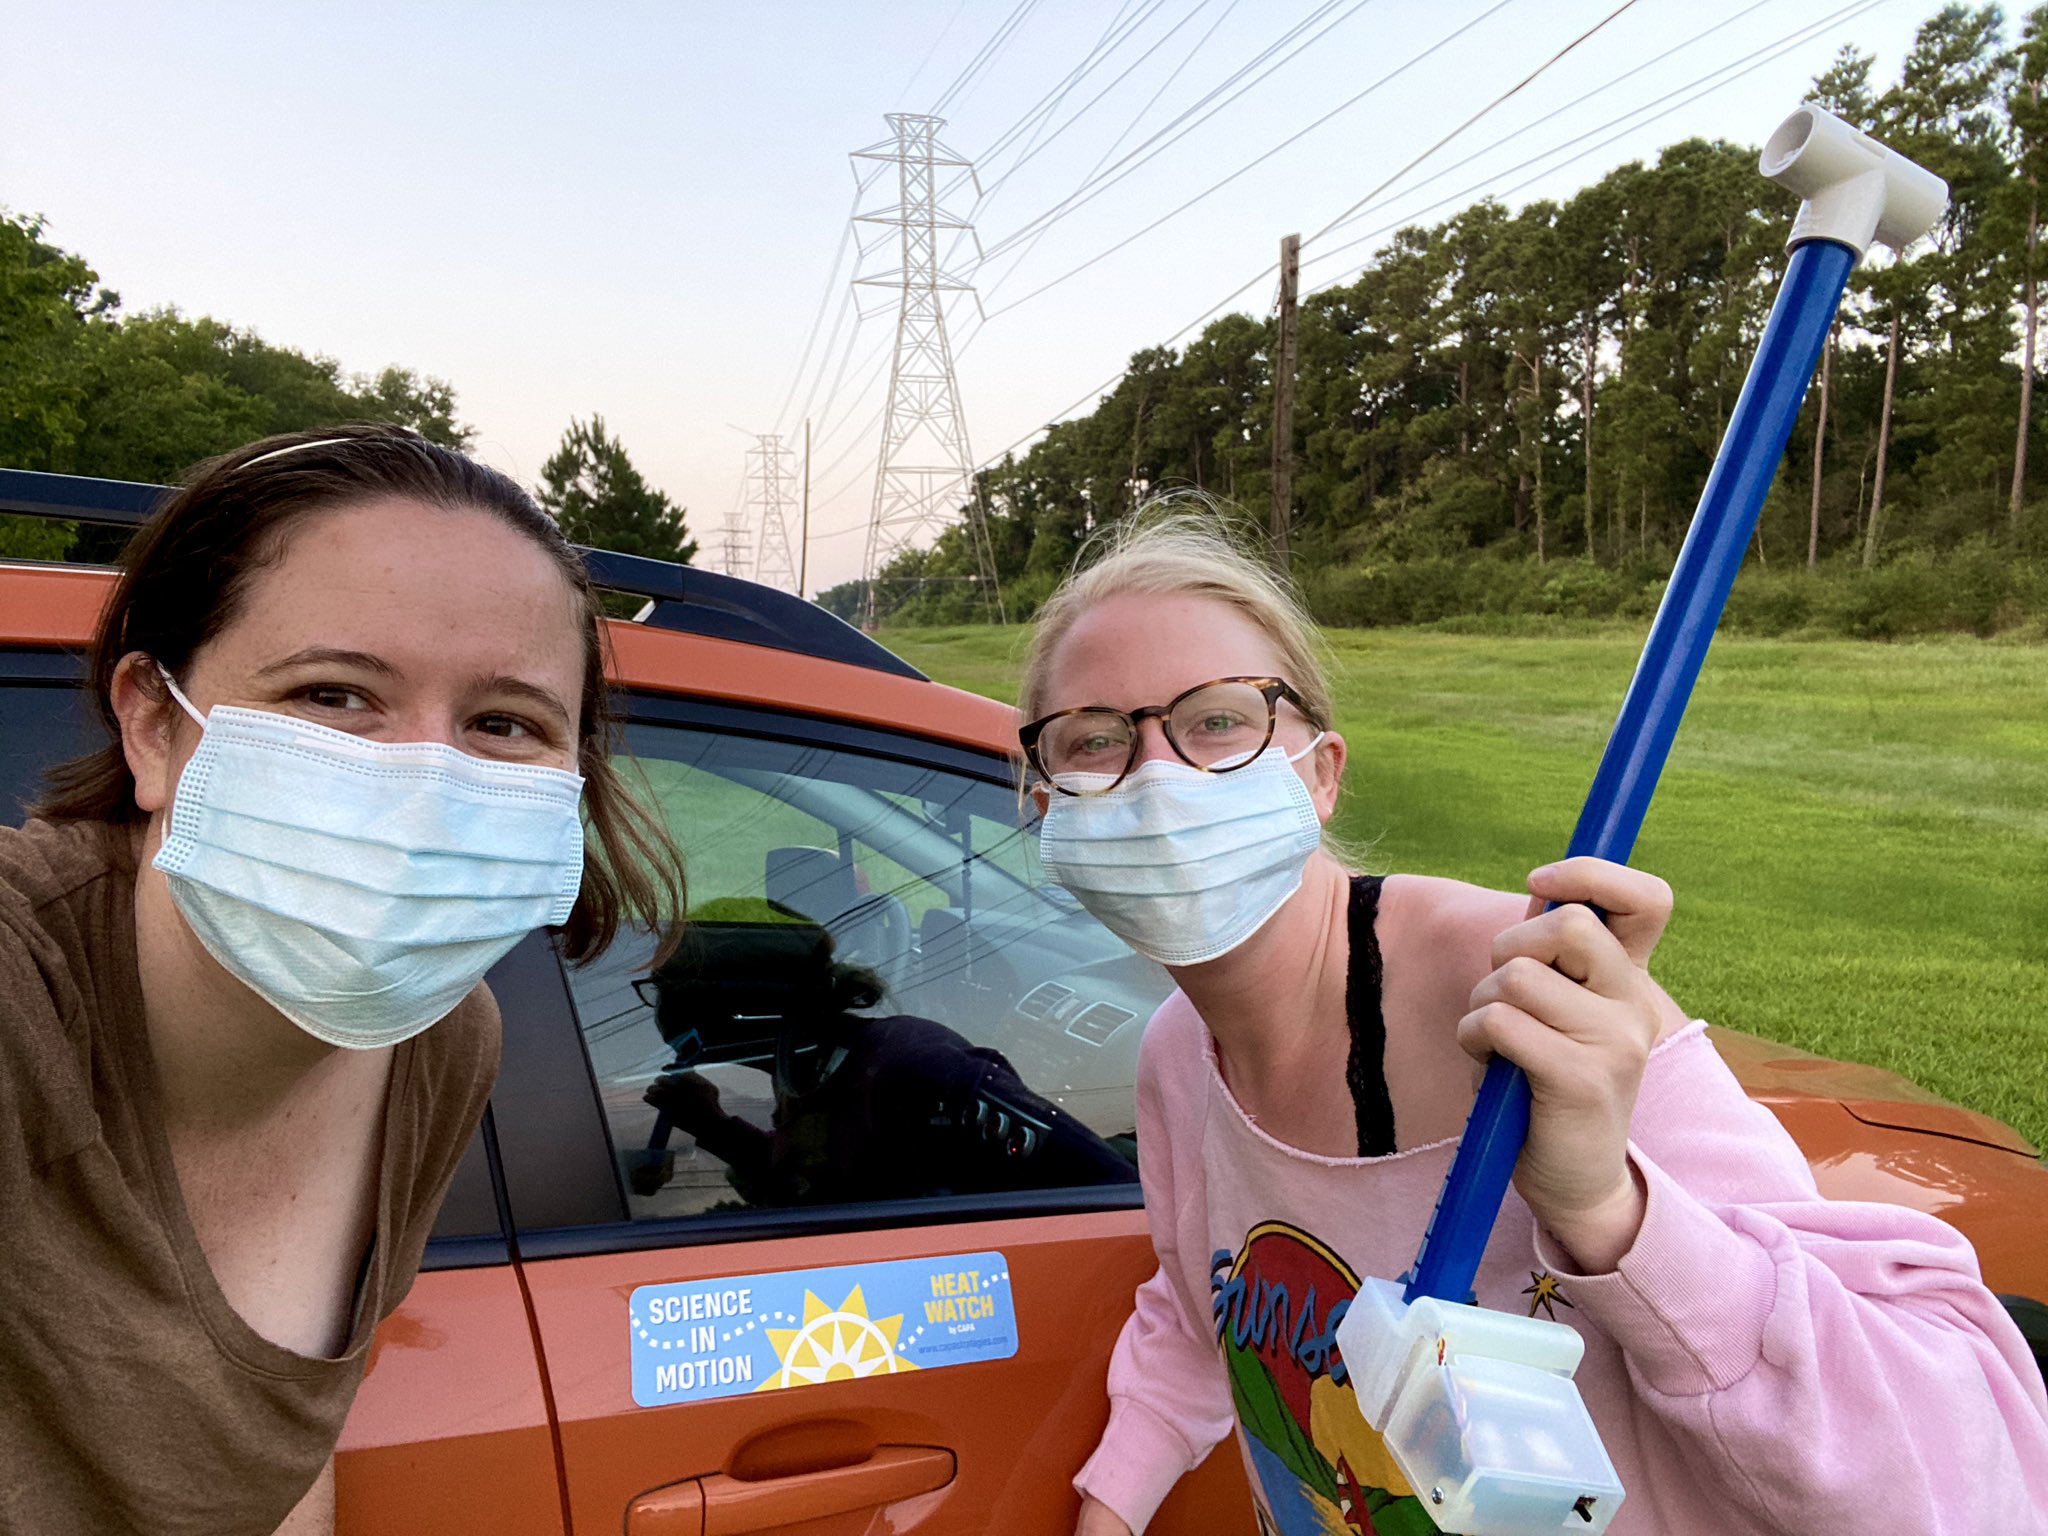 Volunteers Suzanne Simpson from Bayou Land Conservancy and Erin Valley Donato from the Houston Zoo collected heat data in August 2020 in the Houston area to help produce Heat Island maps for the community. 